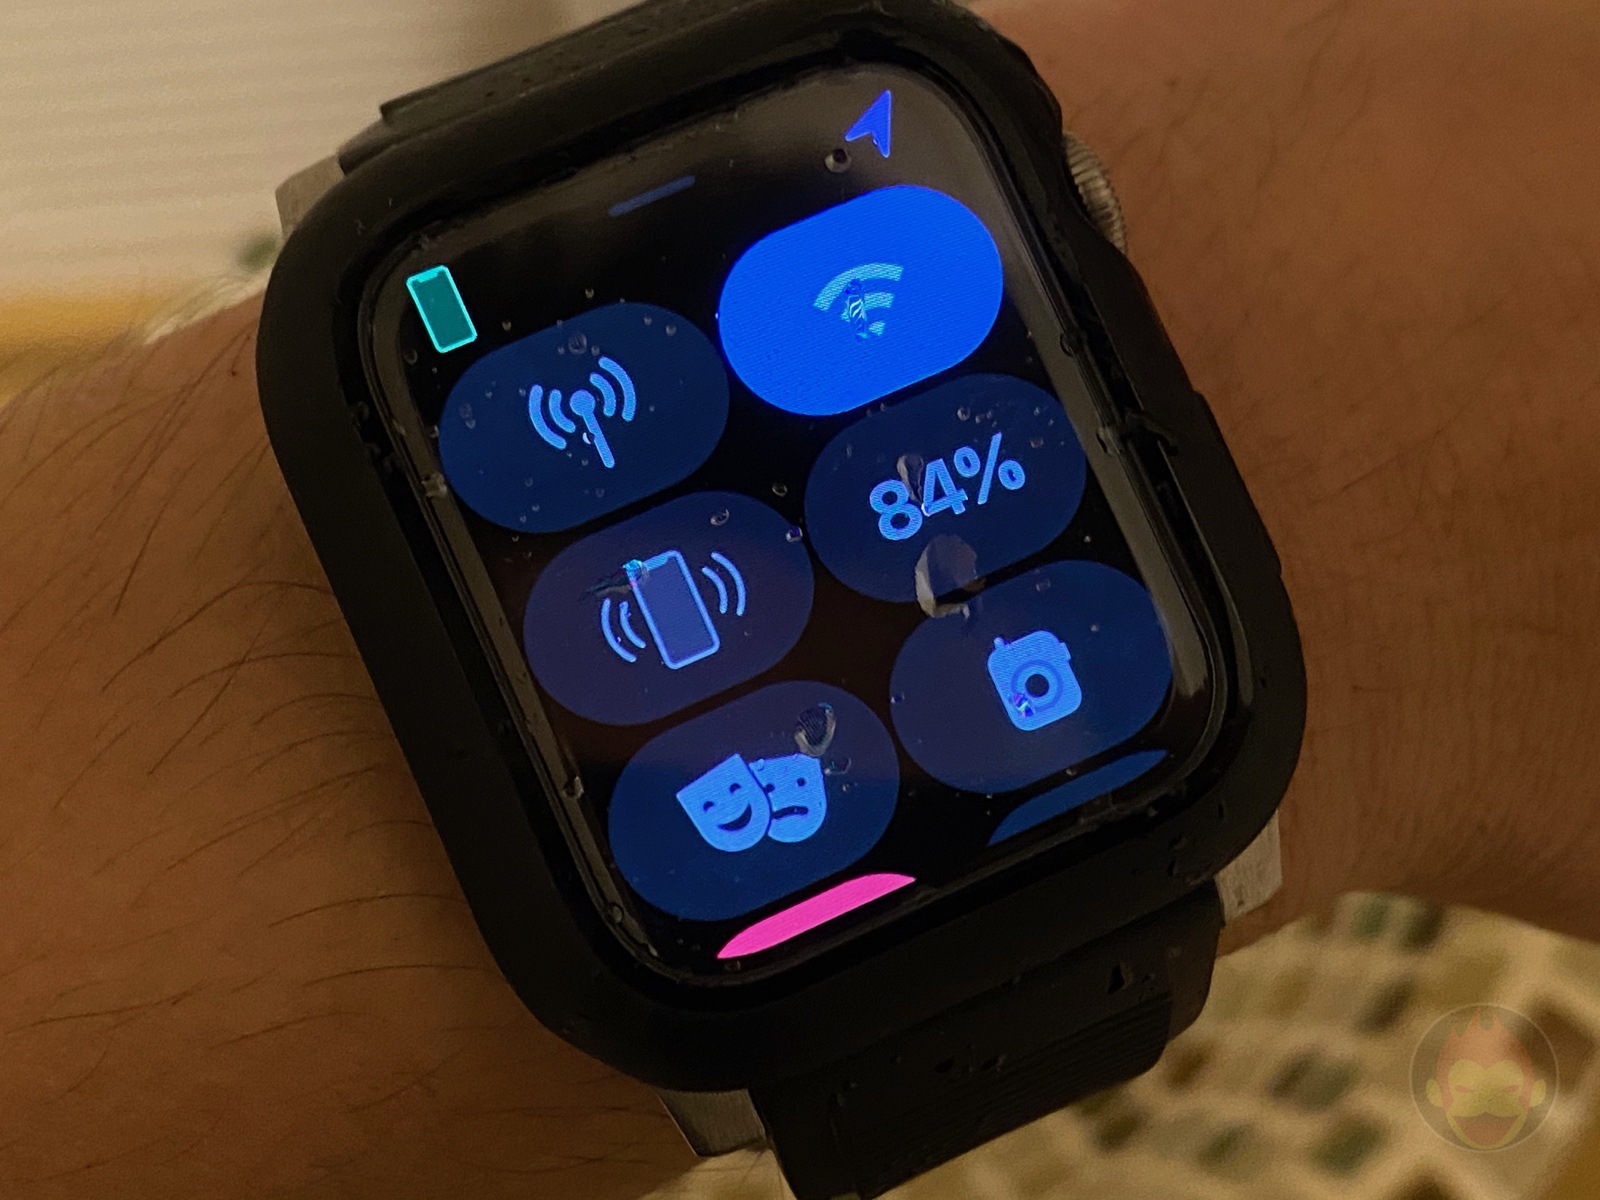 AppleWatchSeries6 With AODisplay OFF 05